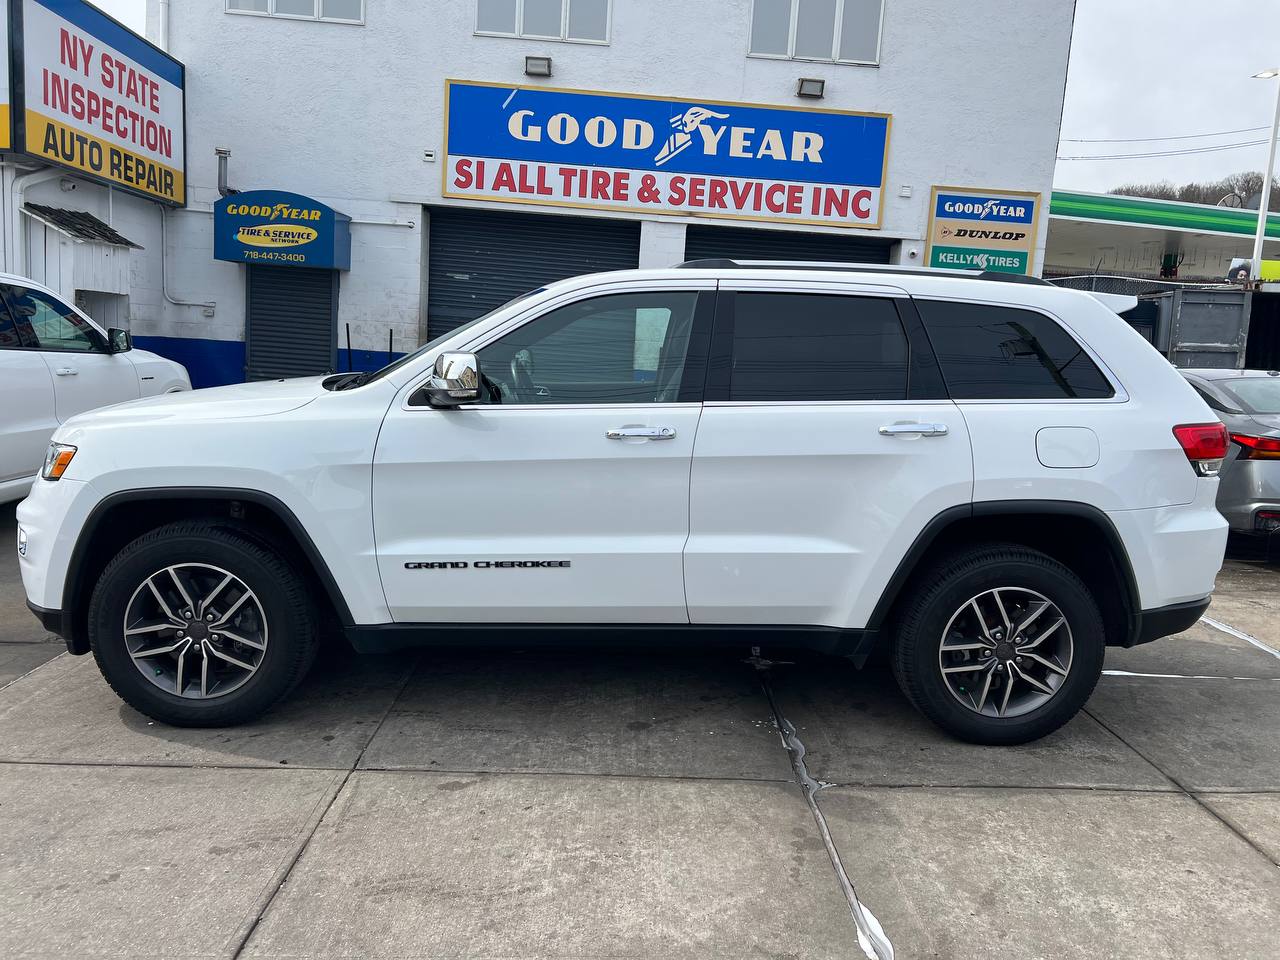 Used - Jeep Grand Cherokee Limited 4x4 SUV for sale in Staten Island NY